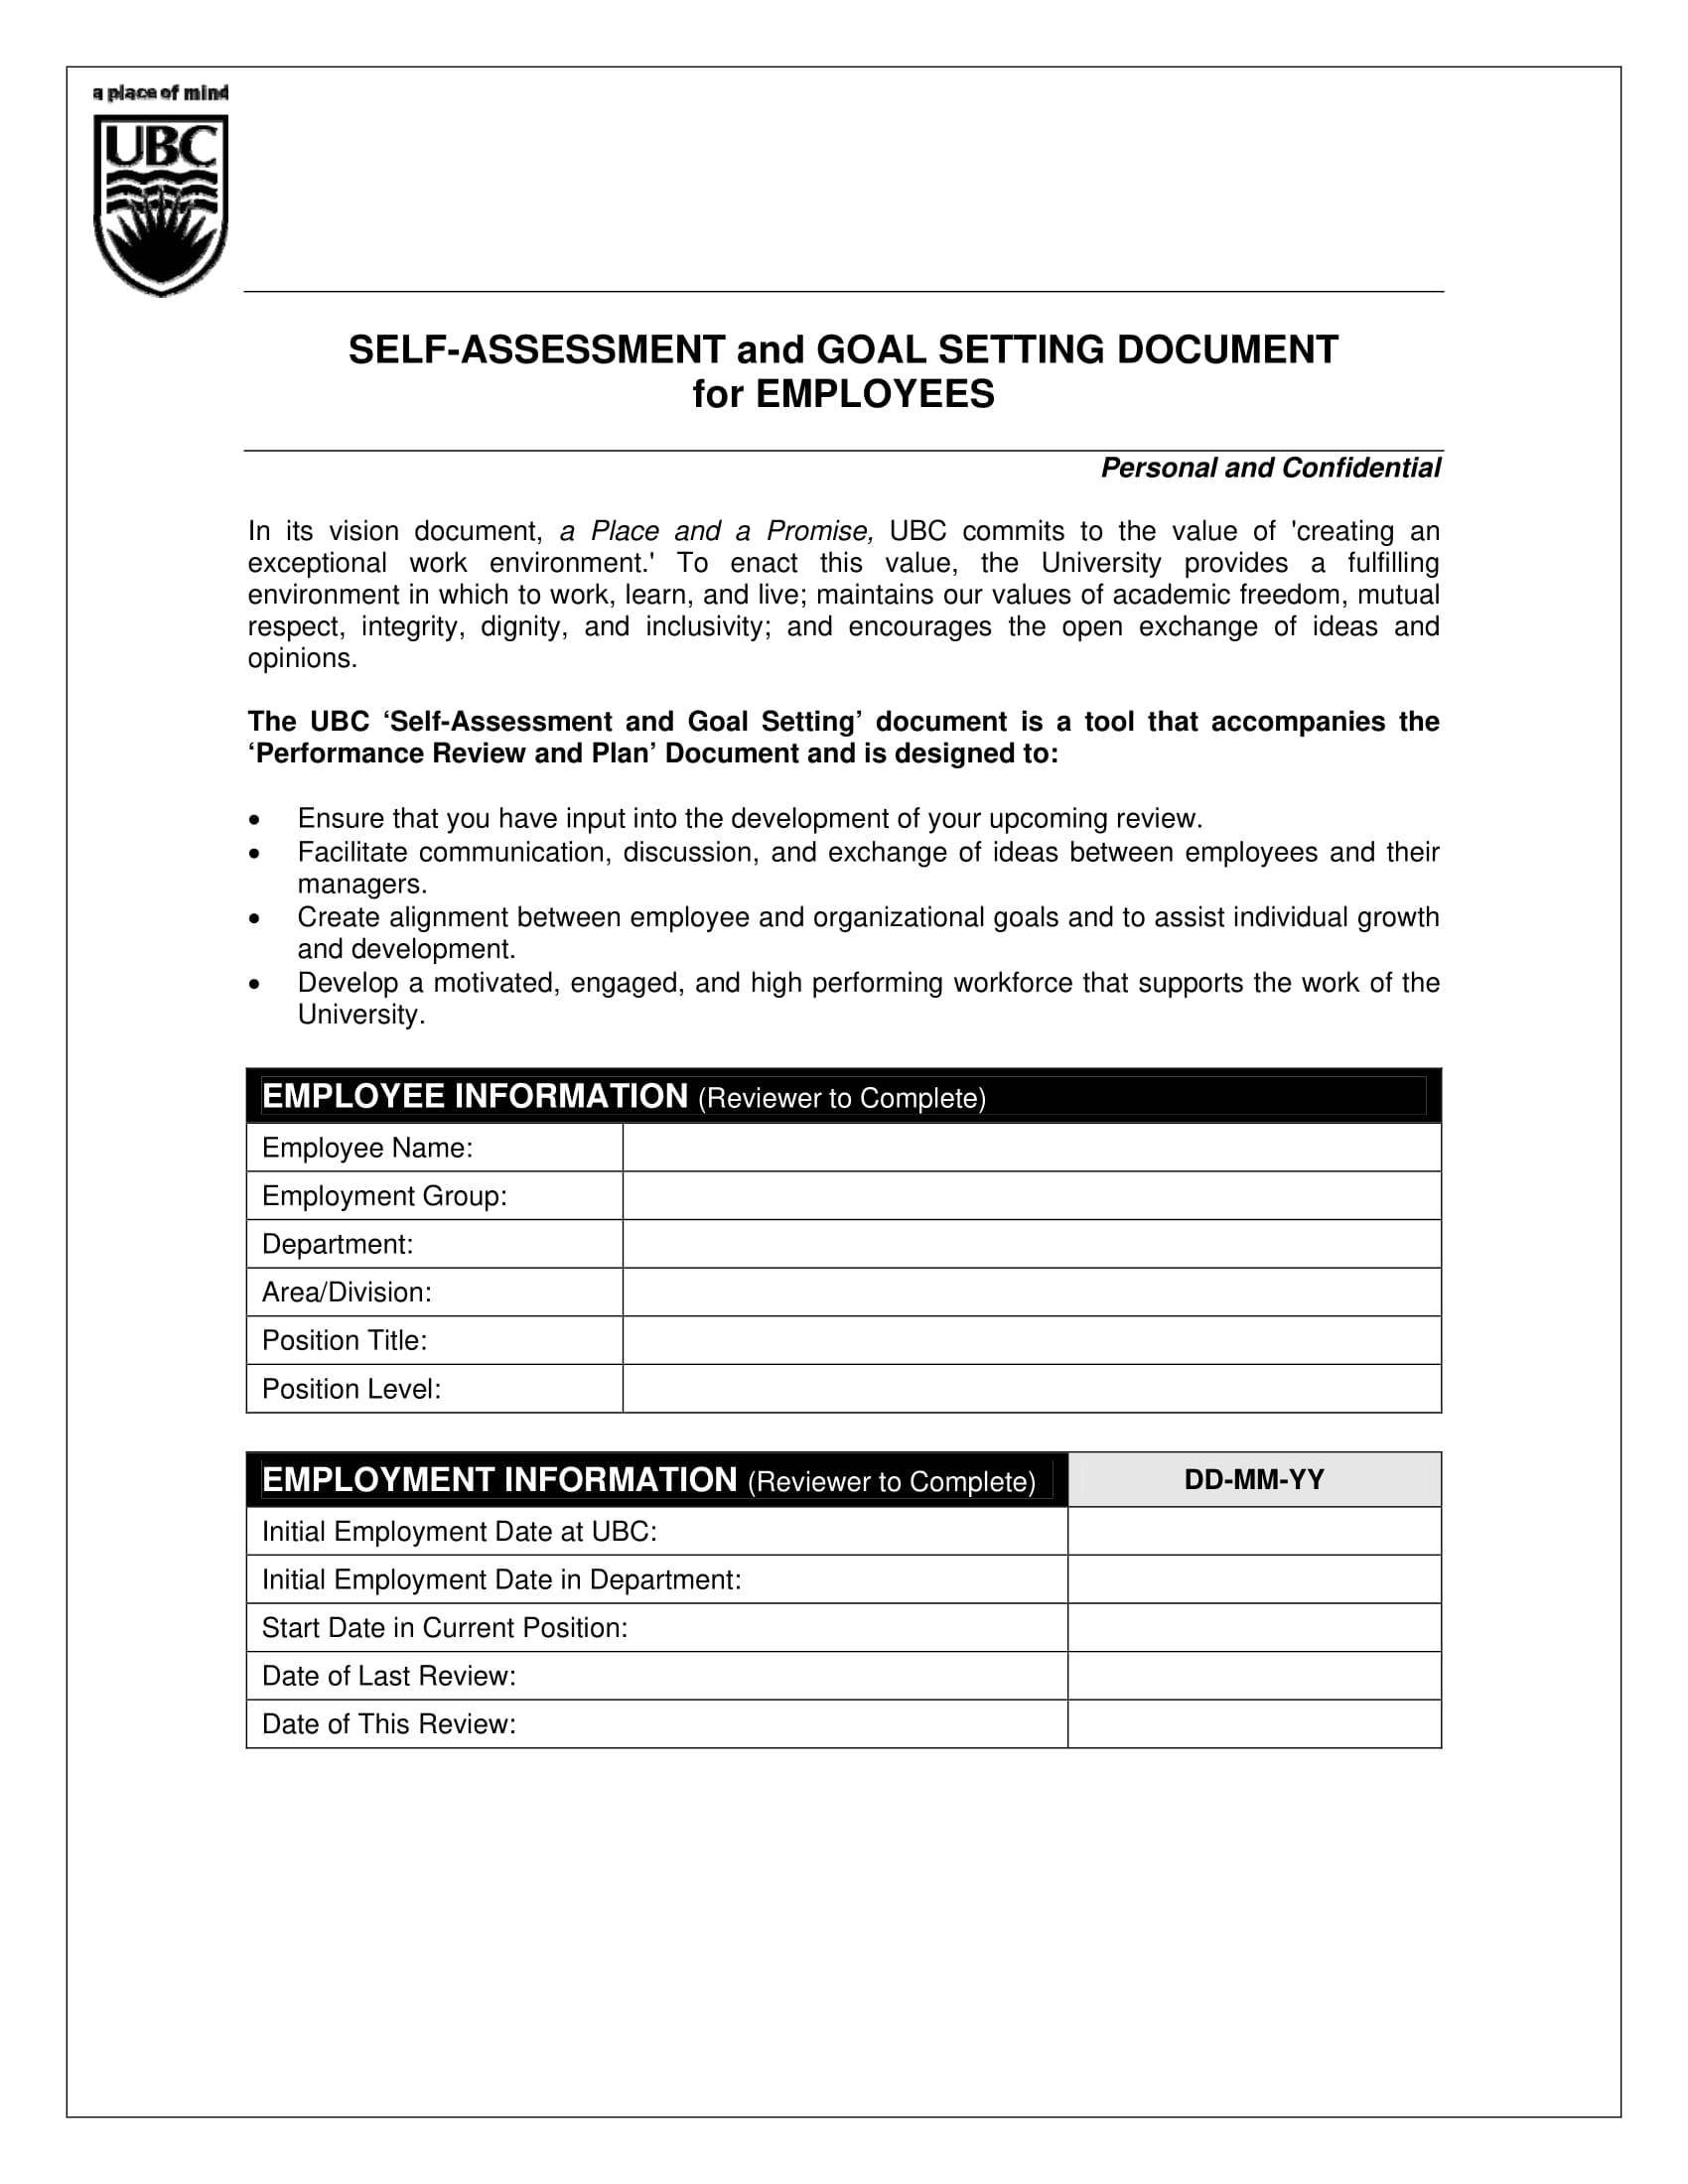 Goal Setting Document for Employees Example